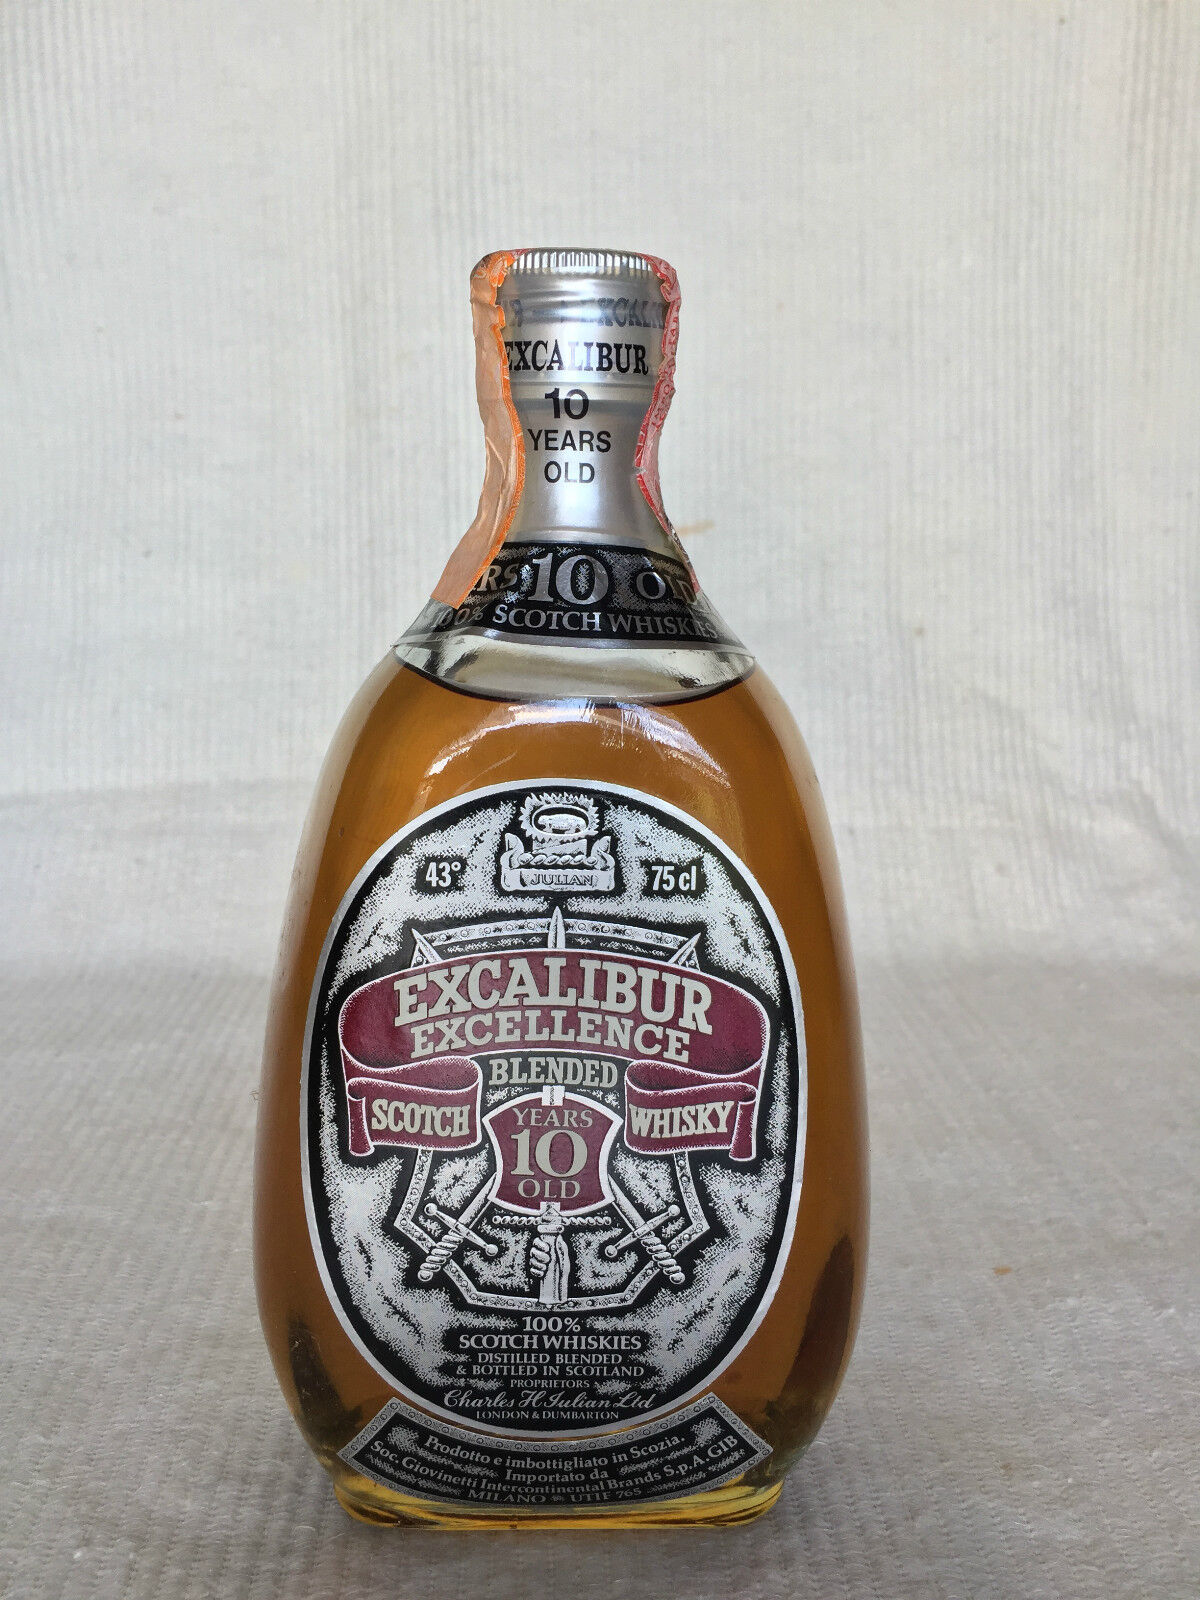 EXCALIBUR EXCELLENCE - SCTOCH WISHY 10 YEARS OLD - ANNI 90 Beperkt 20% KORTING